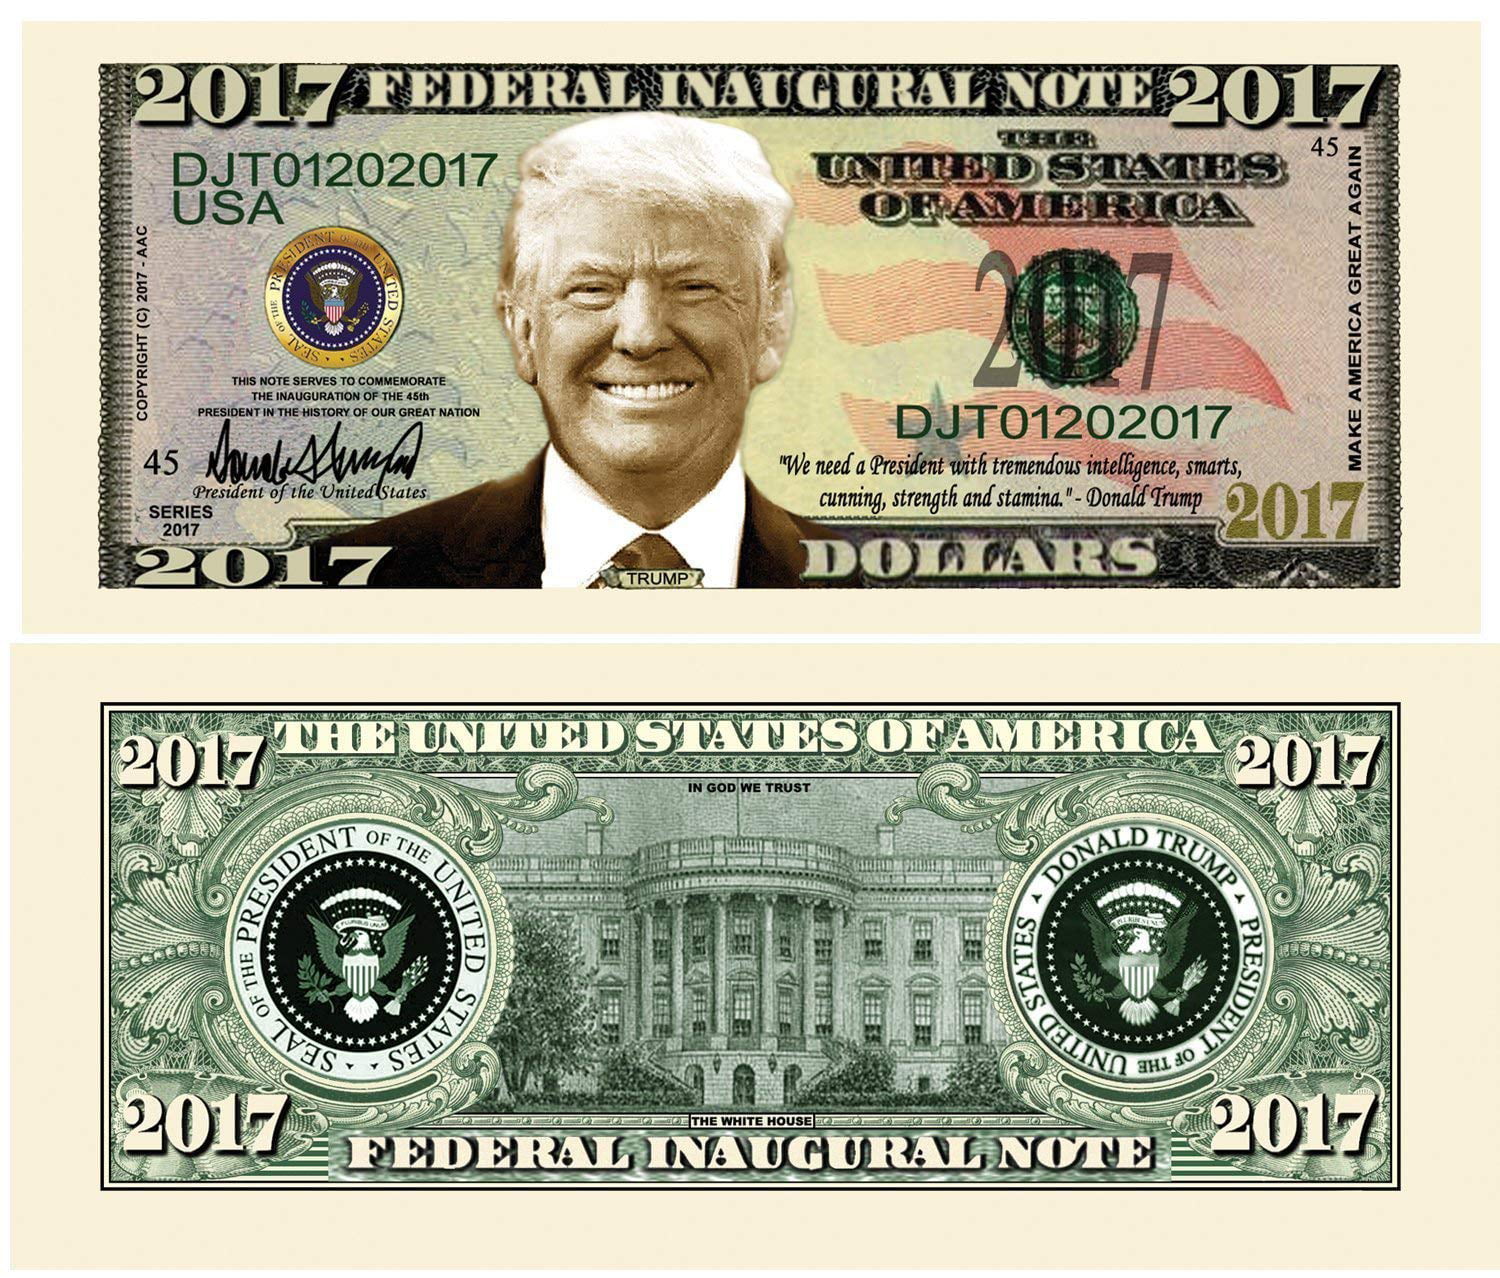 The Trump Family Novelty Dollar Bill comes in a Soft Polly Sleeve 